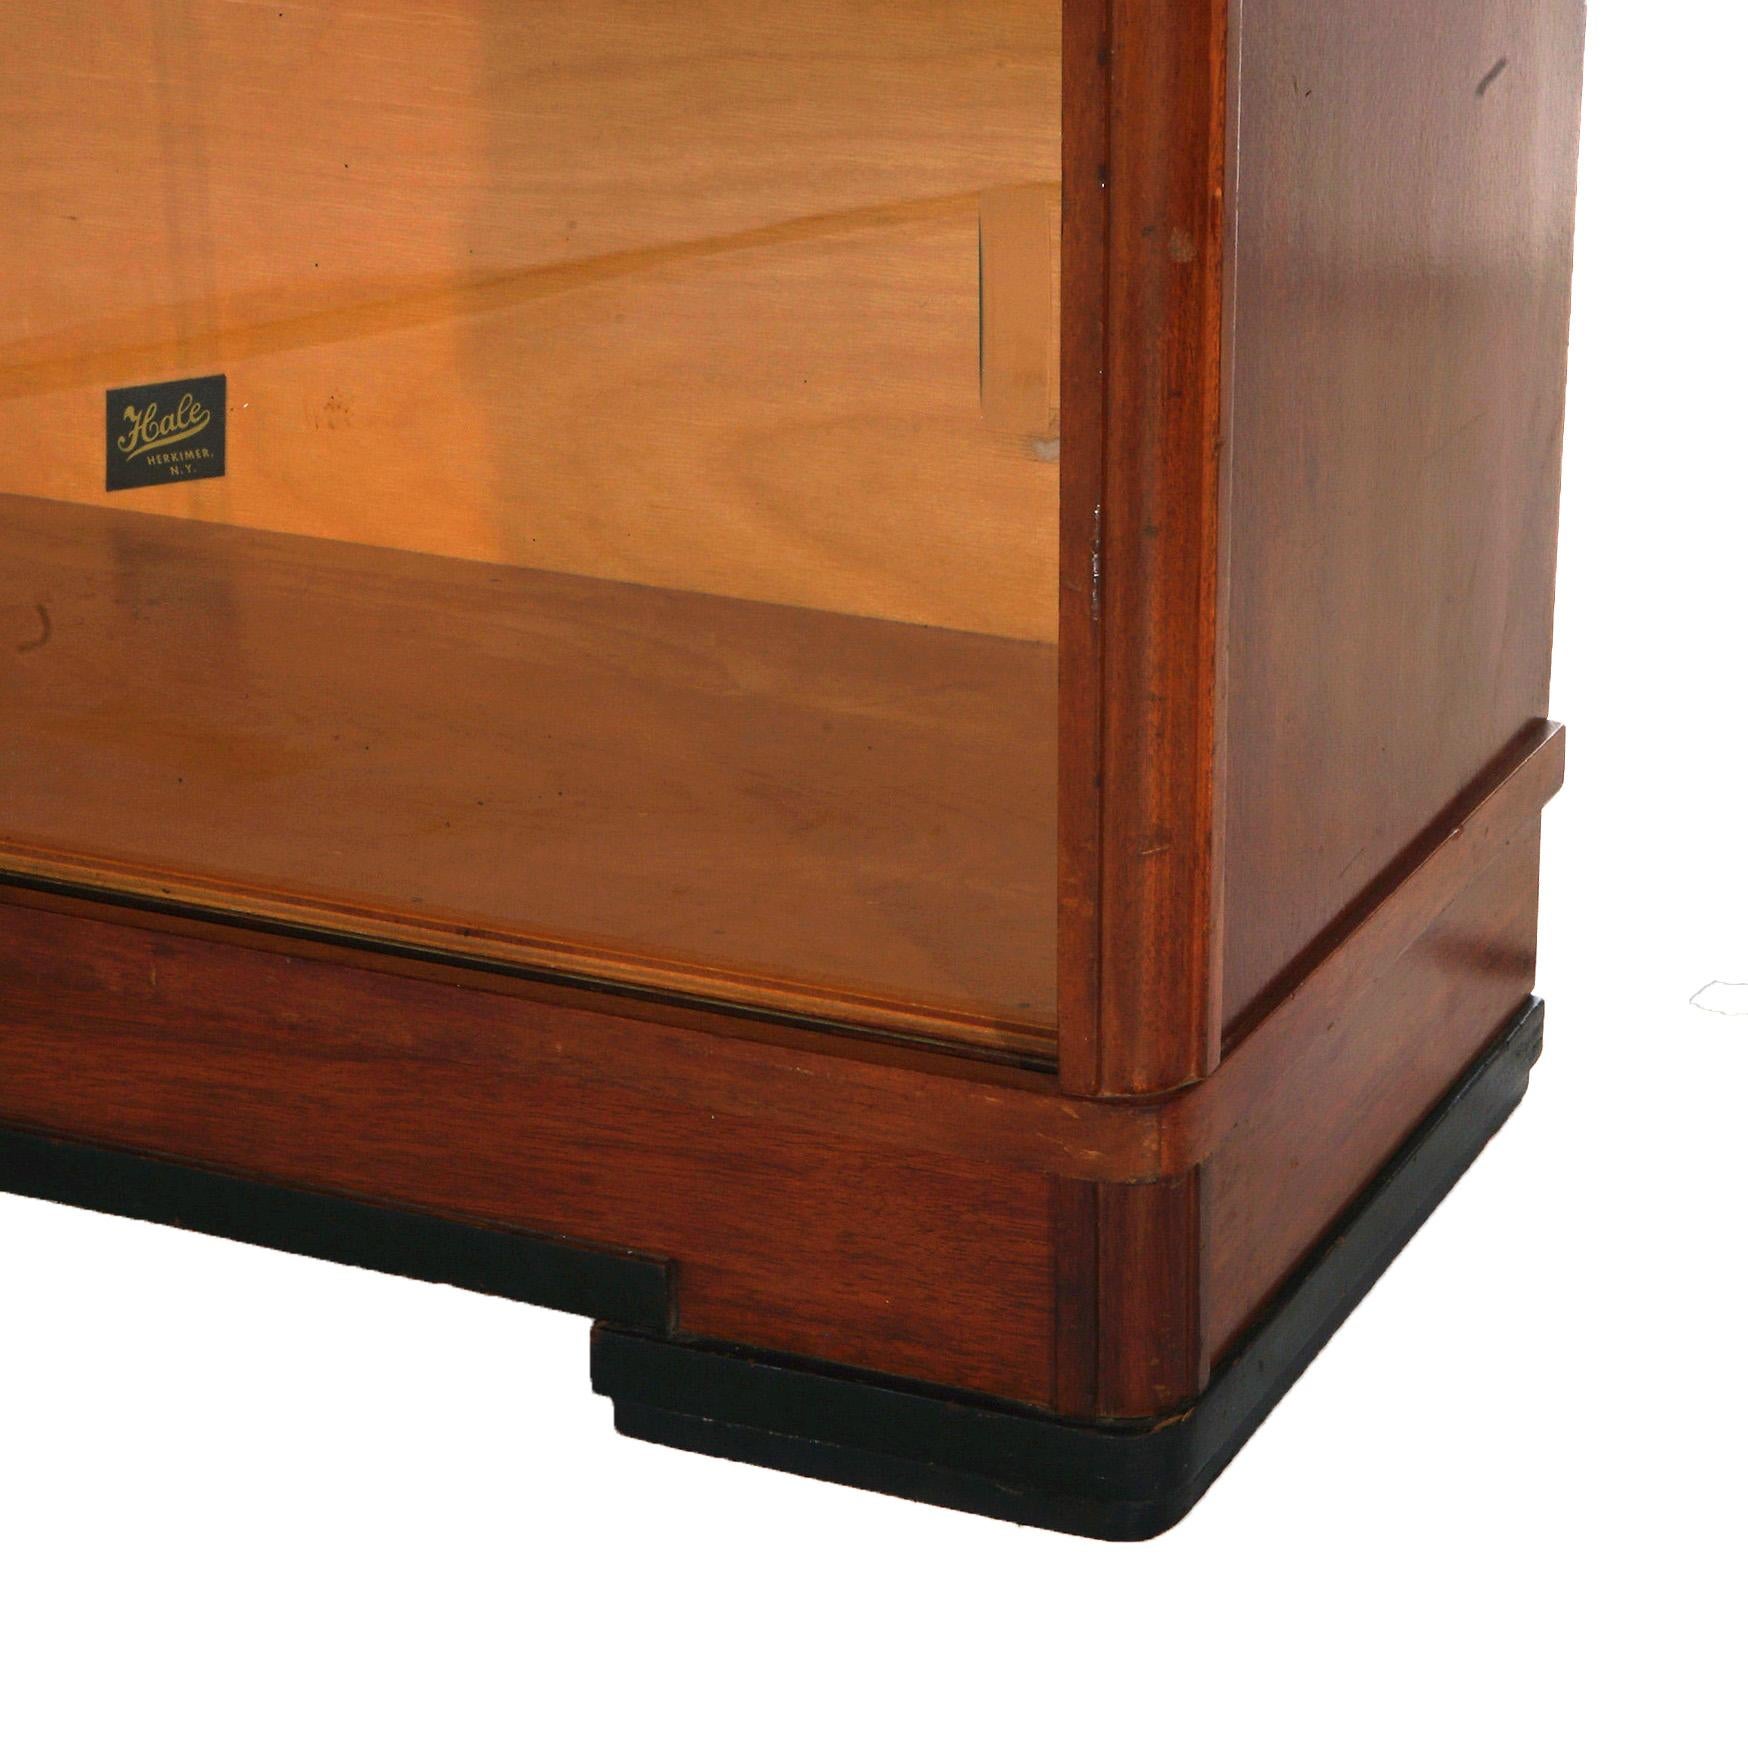 Hale Art Deco Mahogany Four Stack Barrister Bookcase C1930 For Sale 1